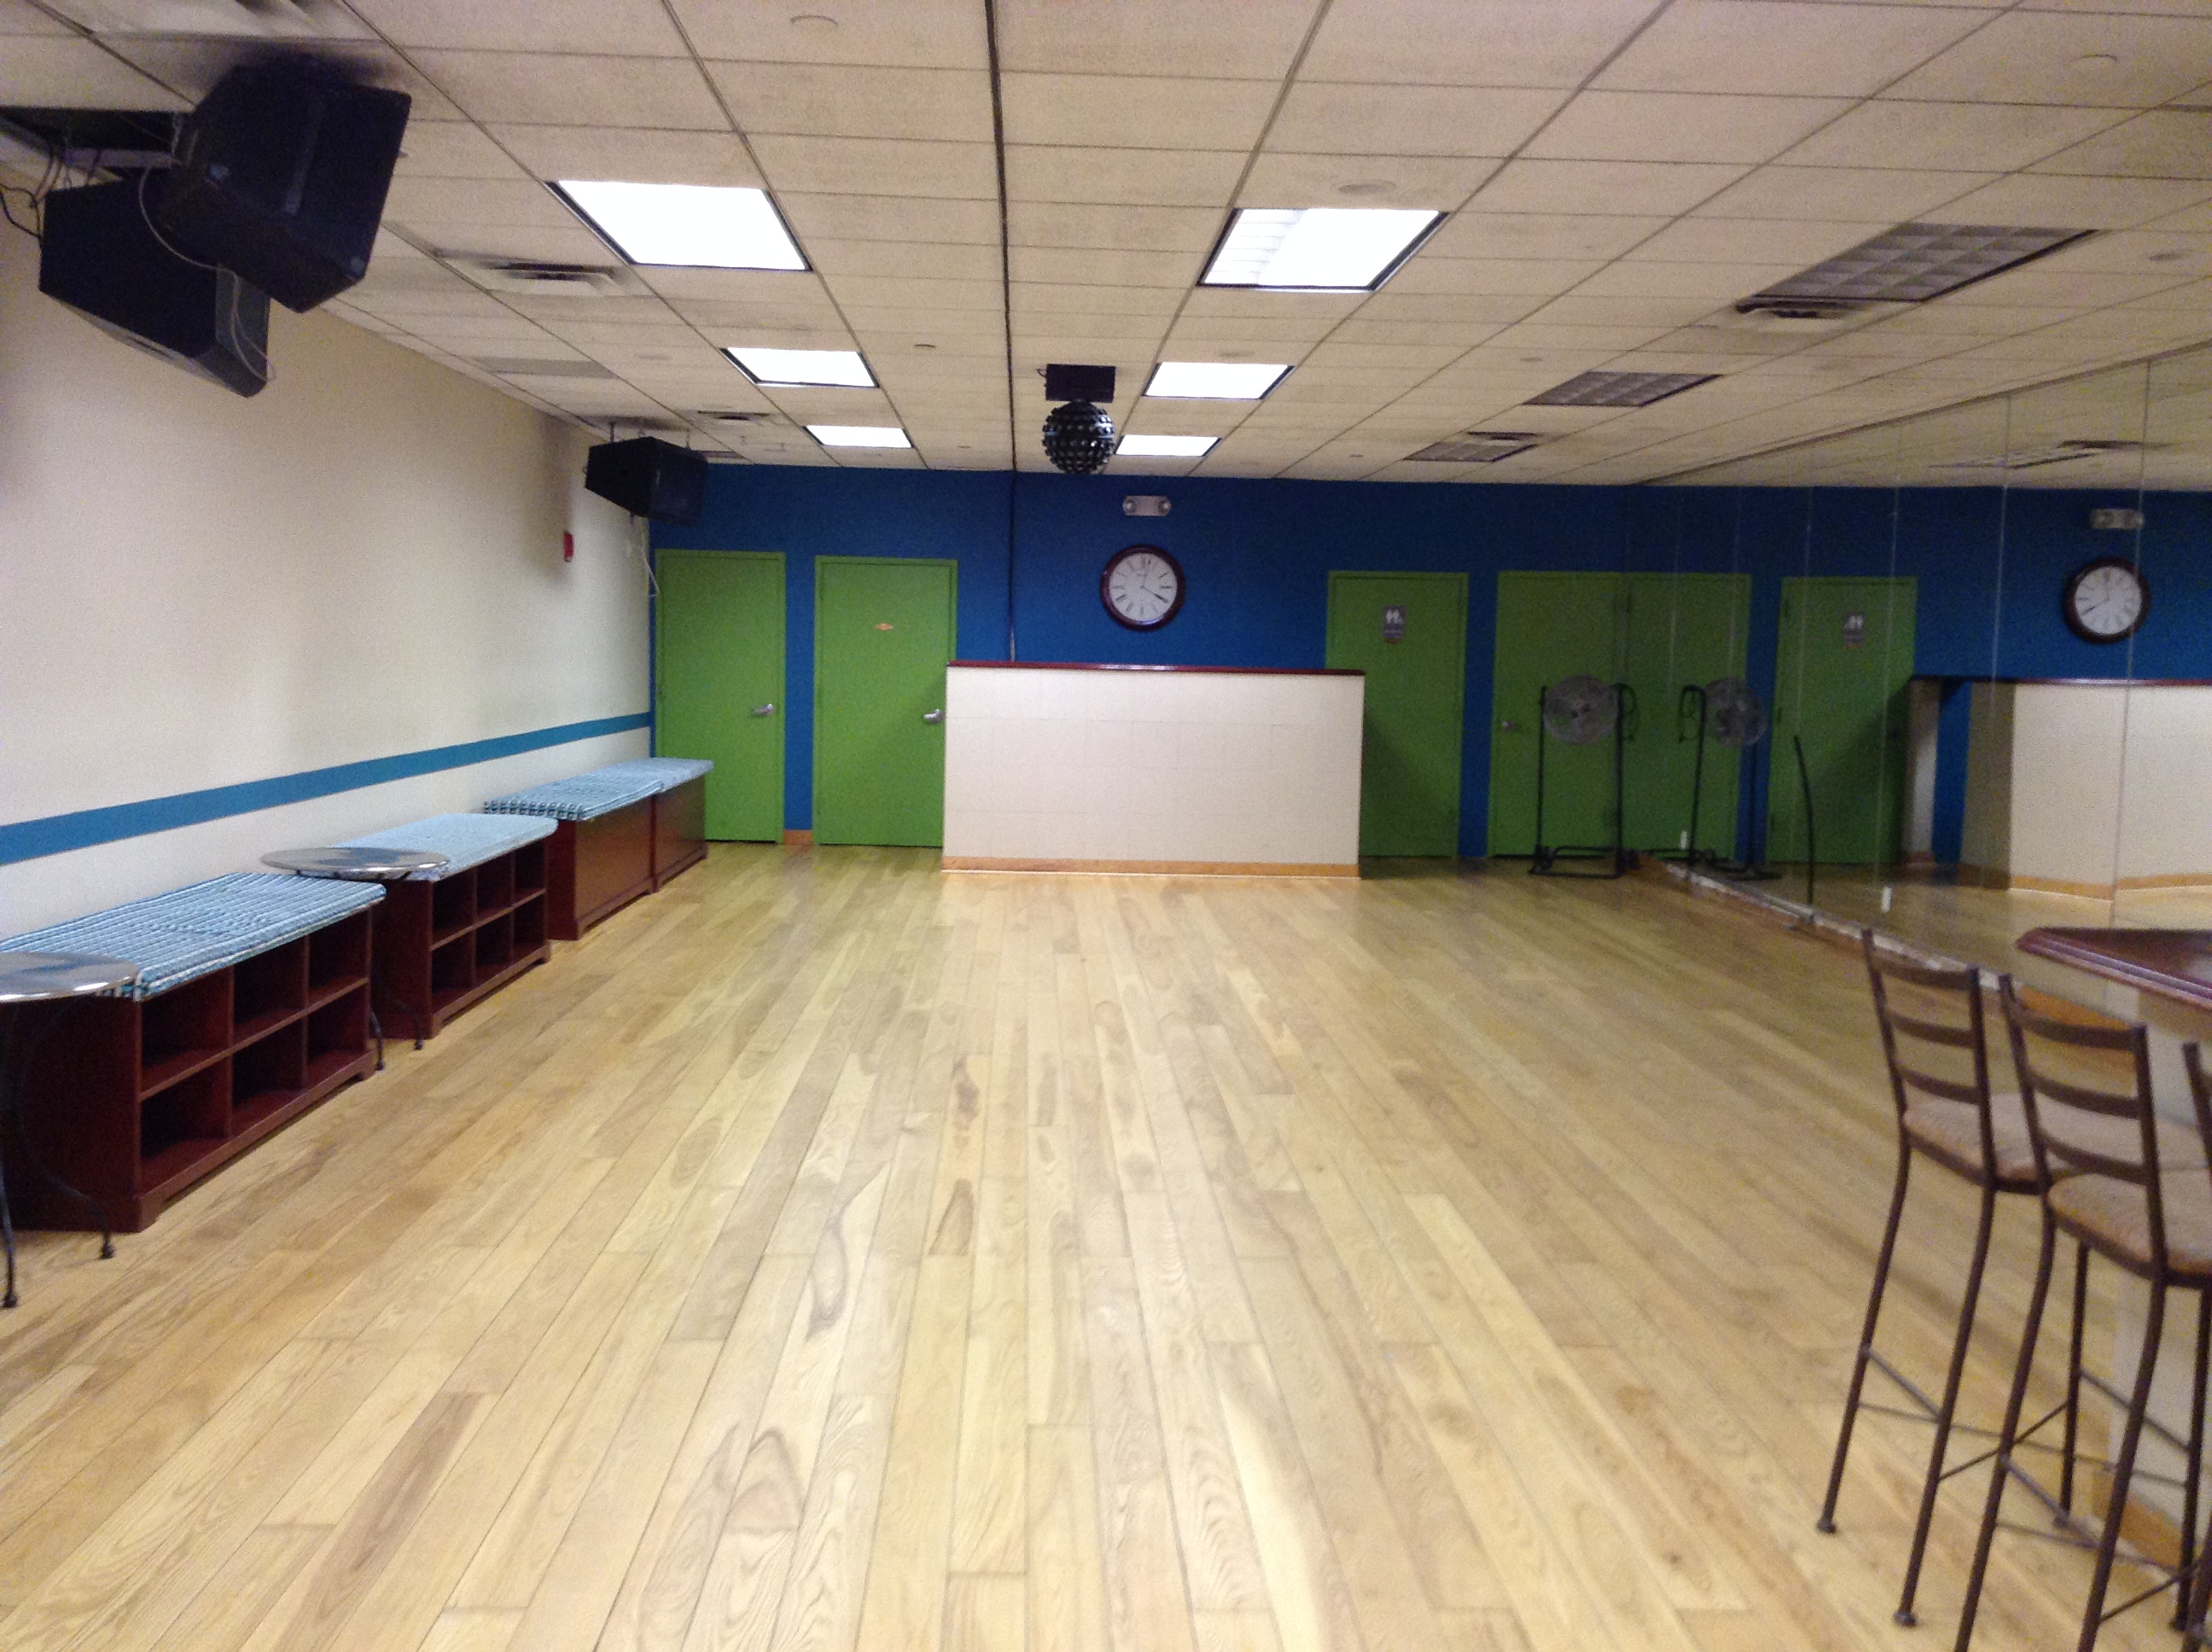 Dance Studio Rental Space NYC for Auditions & Rehearsals in Manhattan - Dance Manhattan Studio Party Room Rental Back